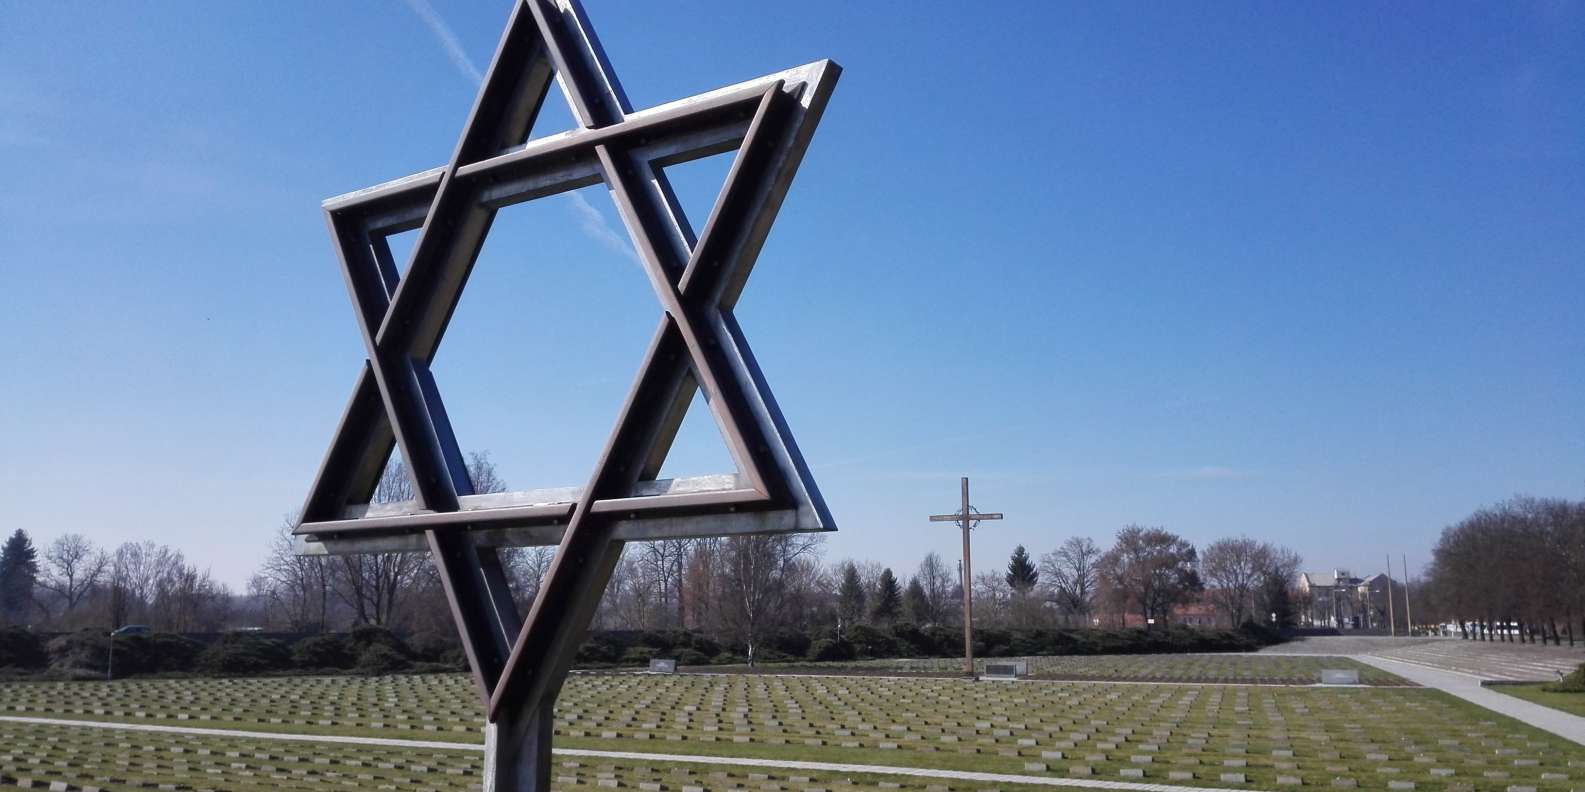 things to do in Terezin